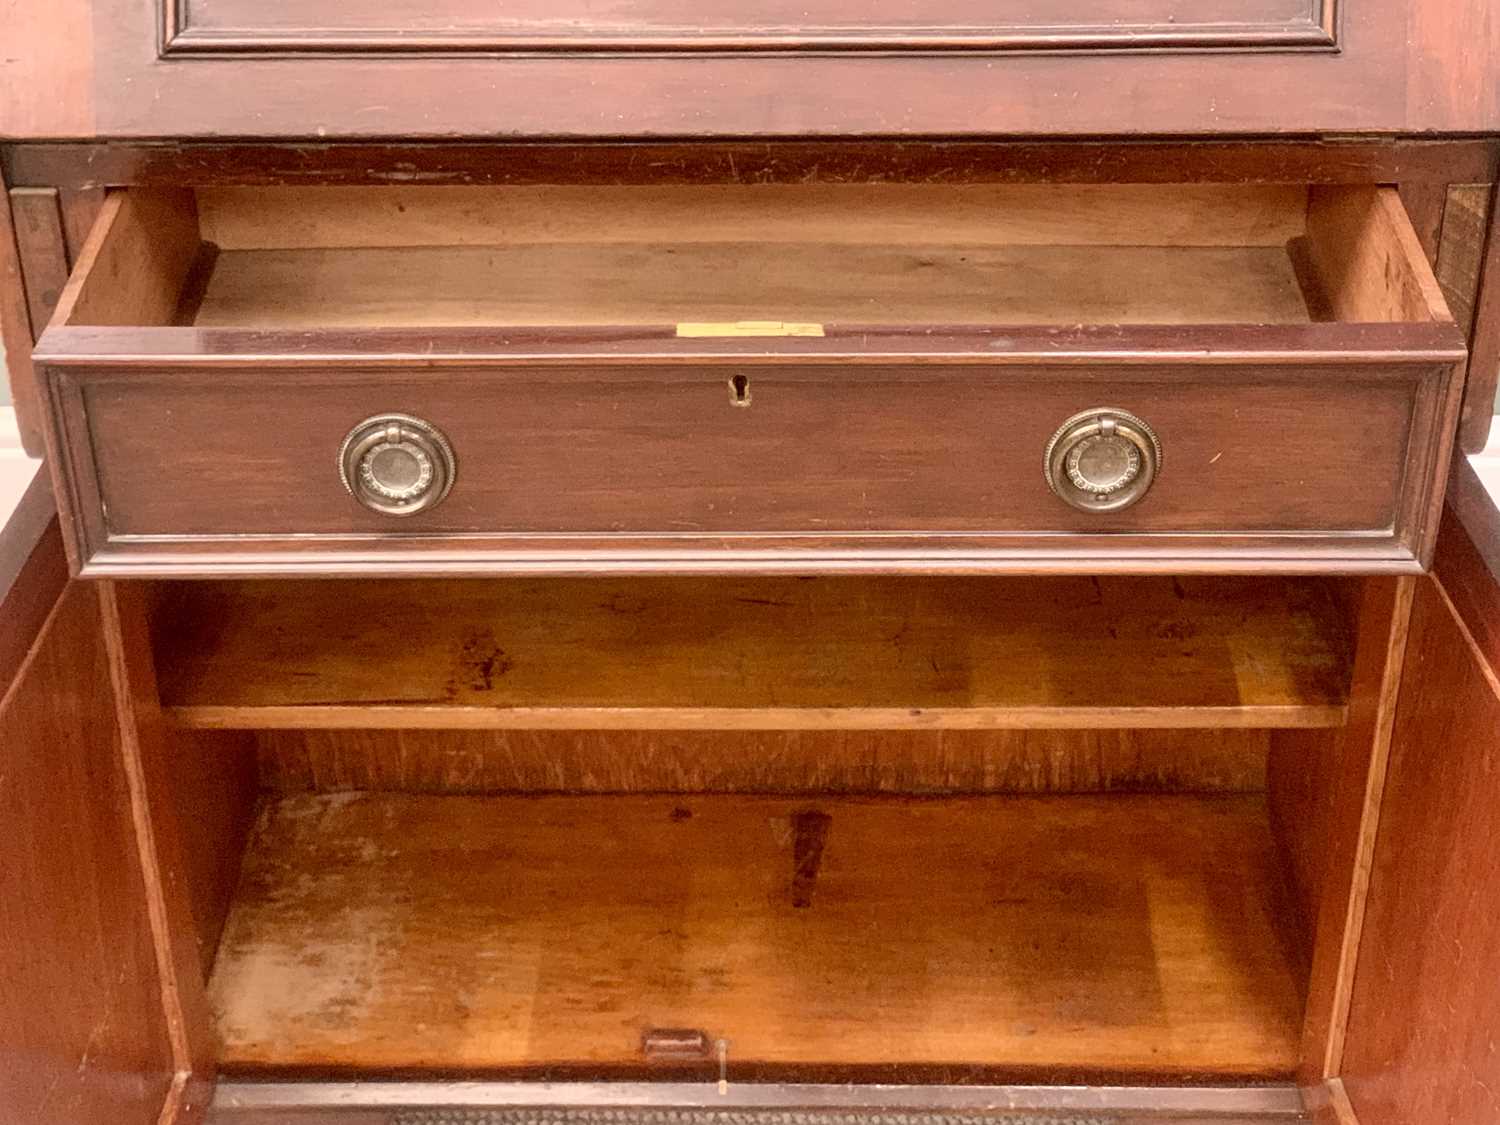 AN EDWARDIAN MAHOGANY BUREAU BOOKCASE having a twin door leaded-glass upper section over a fall - Image 10 of 12